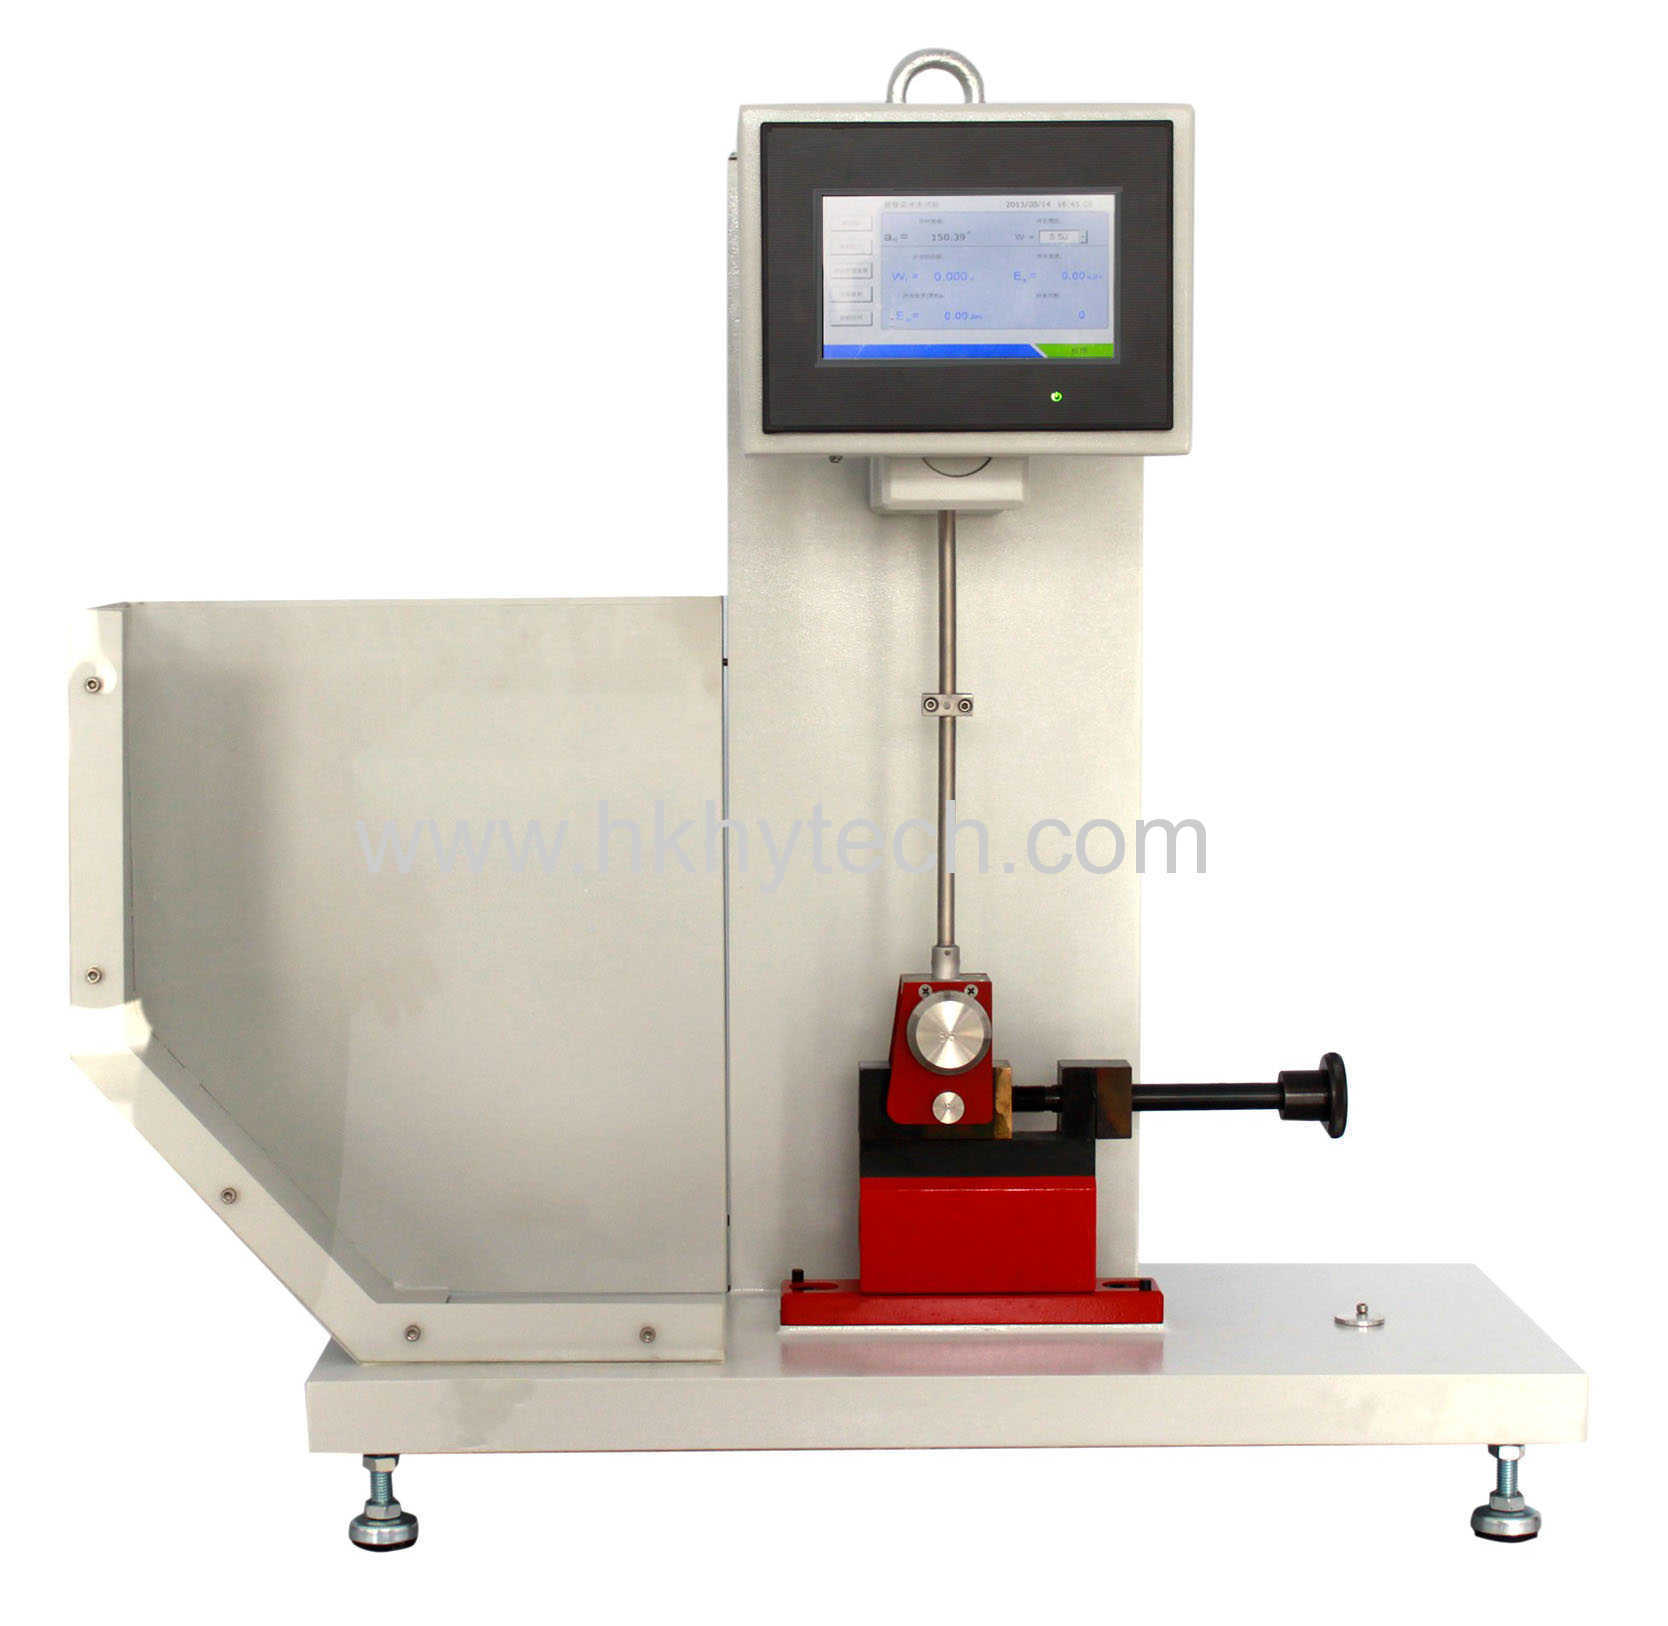 The prospects for the development of plastic pipe tester